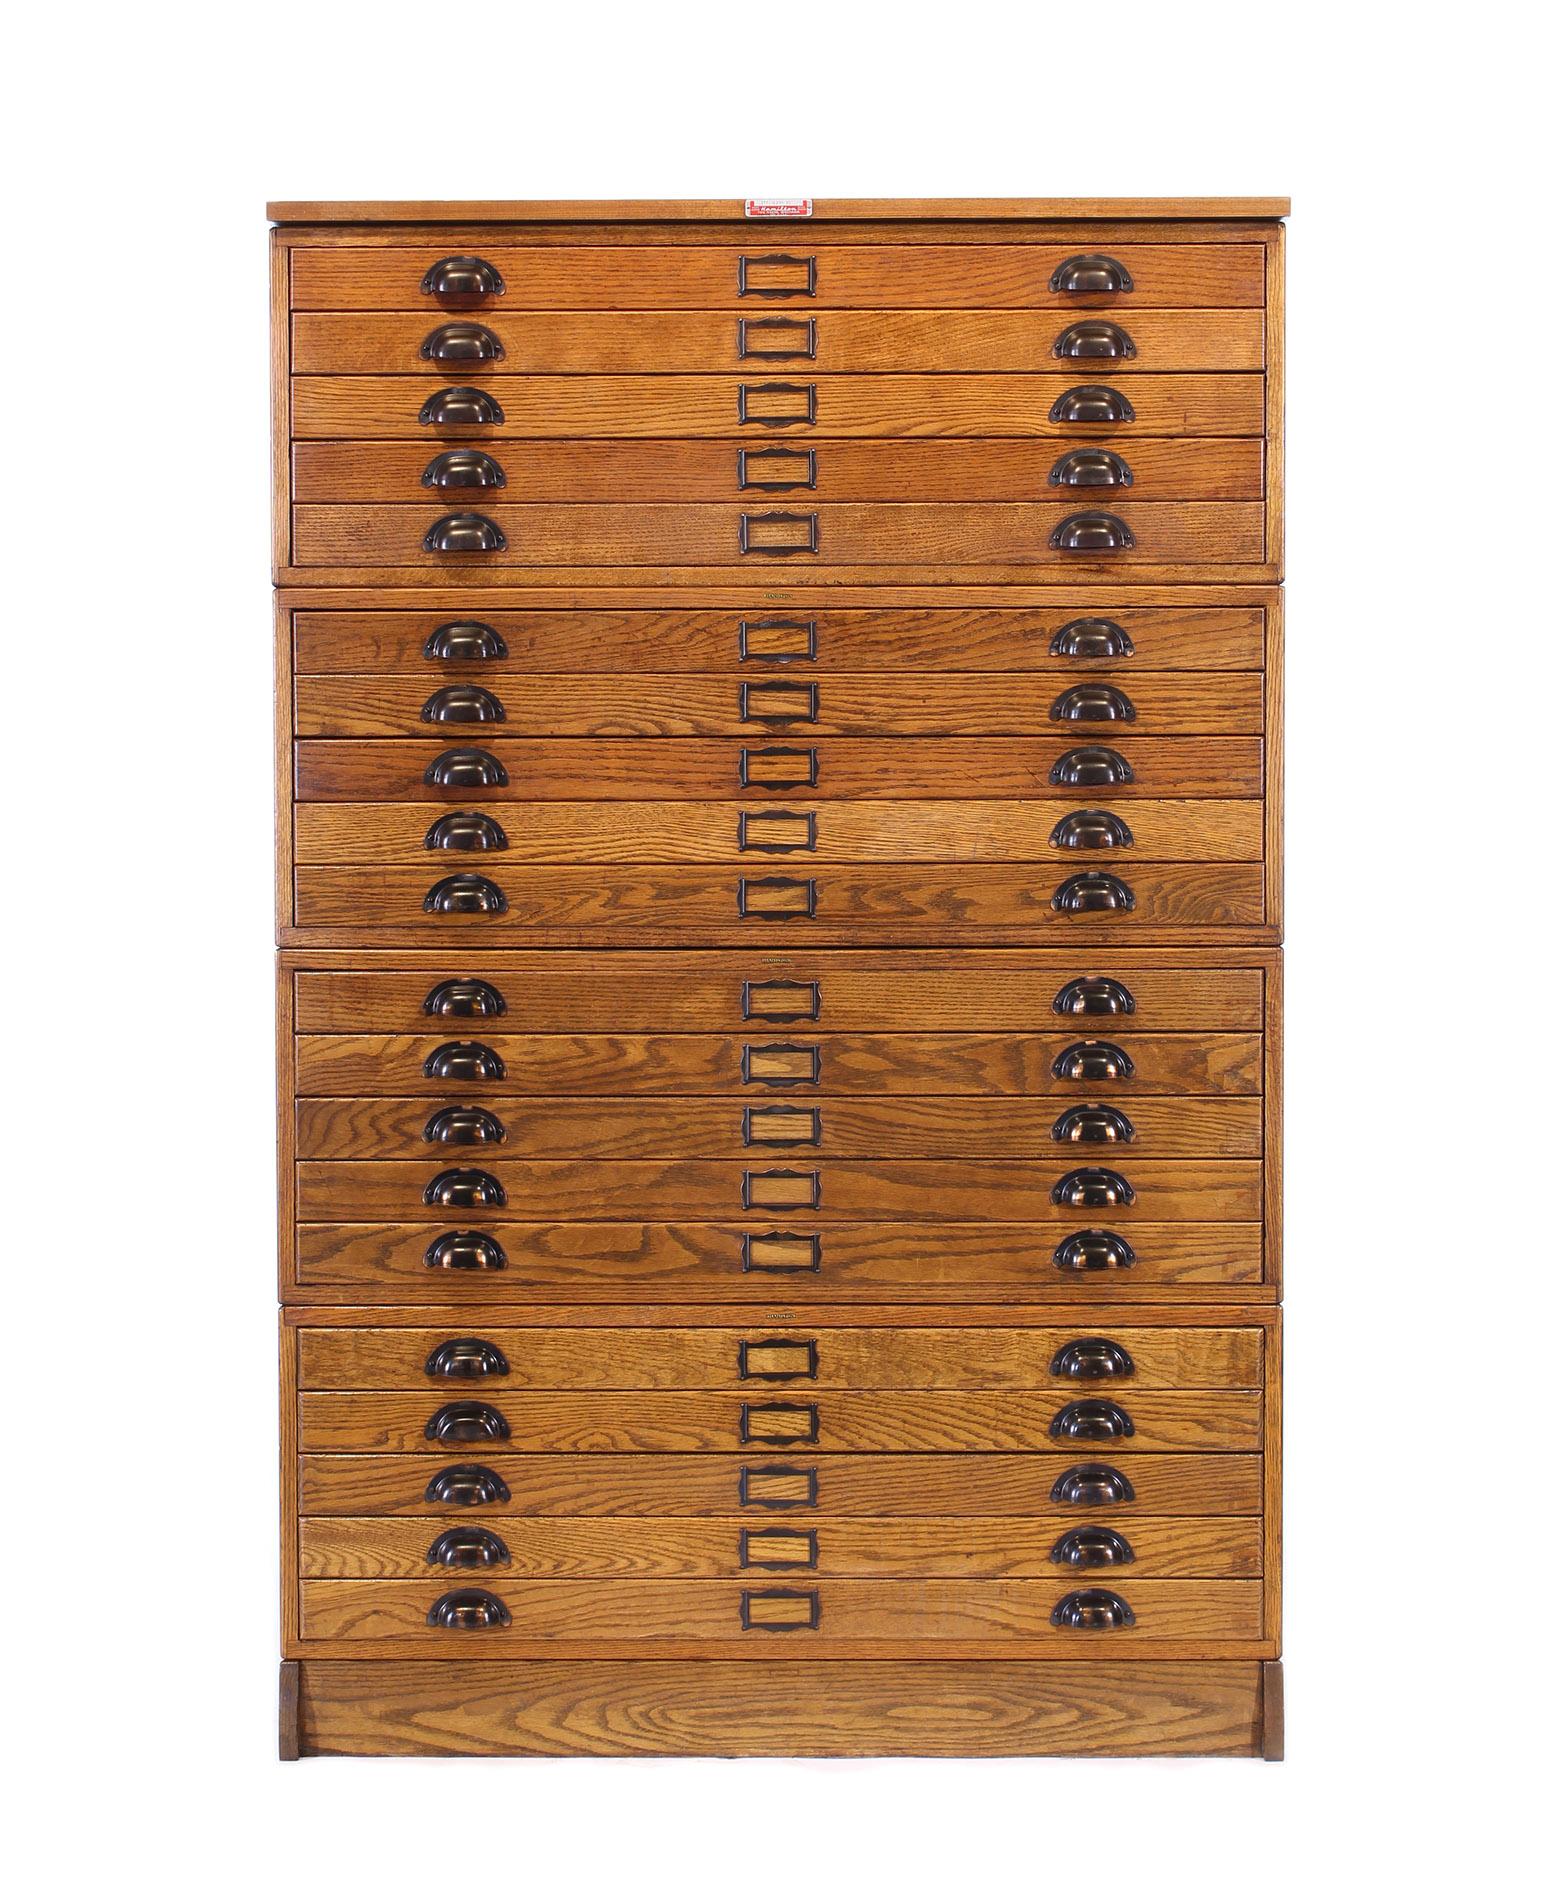 Vintage Hamilton oak 20 drawer flat file storage cabinet. In six sections, four cabinets, top and base. Overall dimensions: 40 3.4